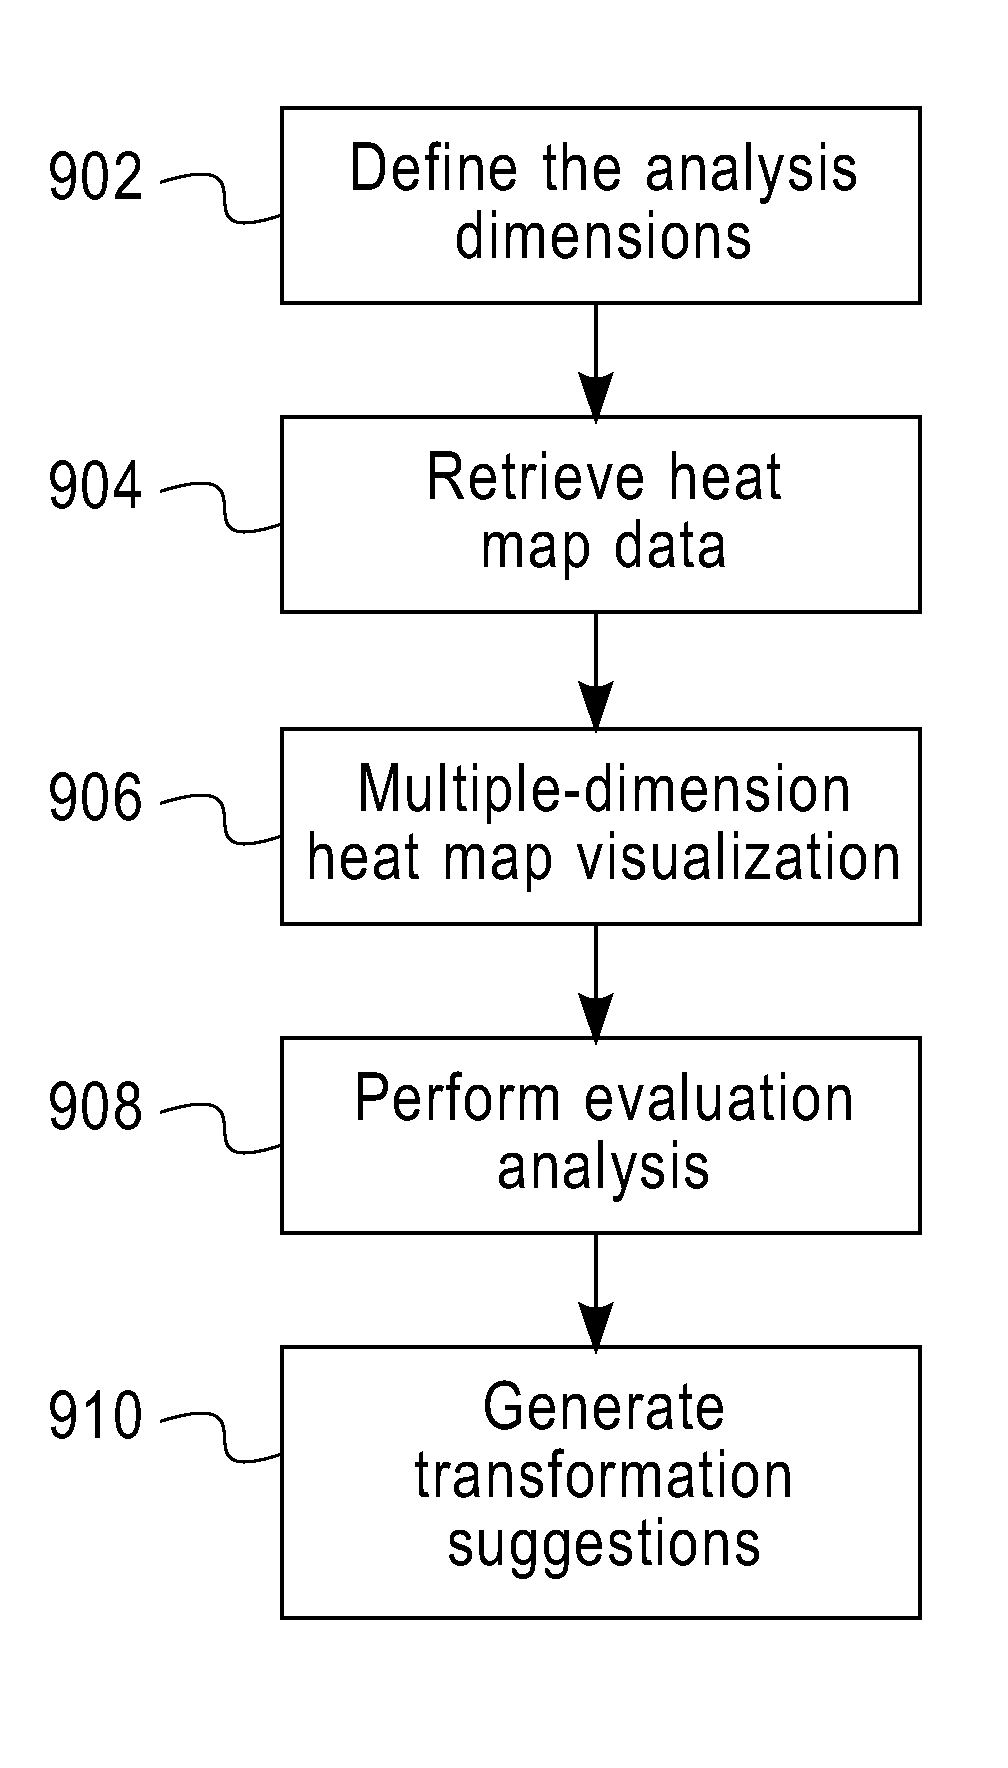 System and method for finding business transformation opportunities by analyzing series of heat maps by dimension